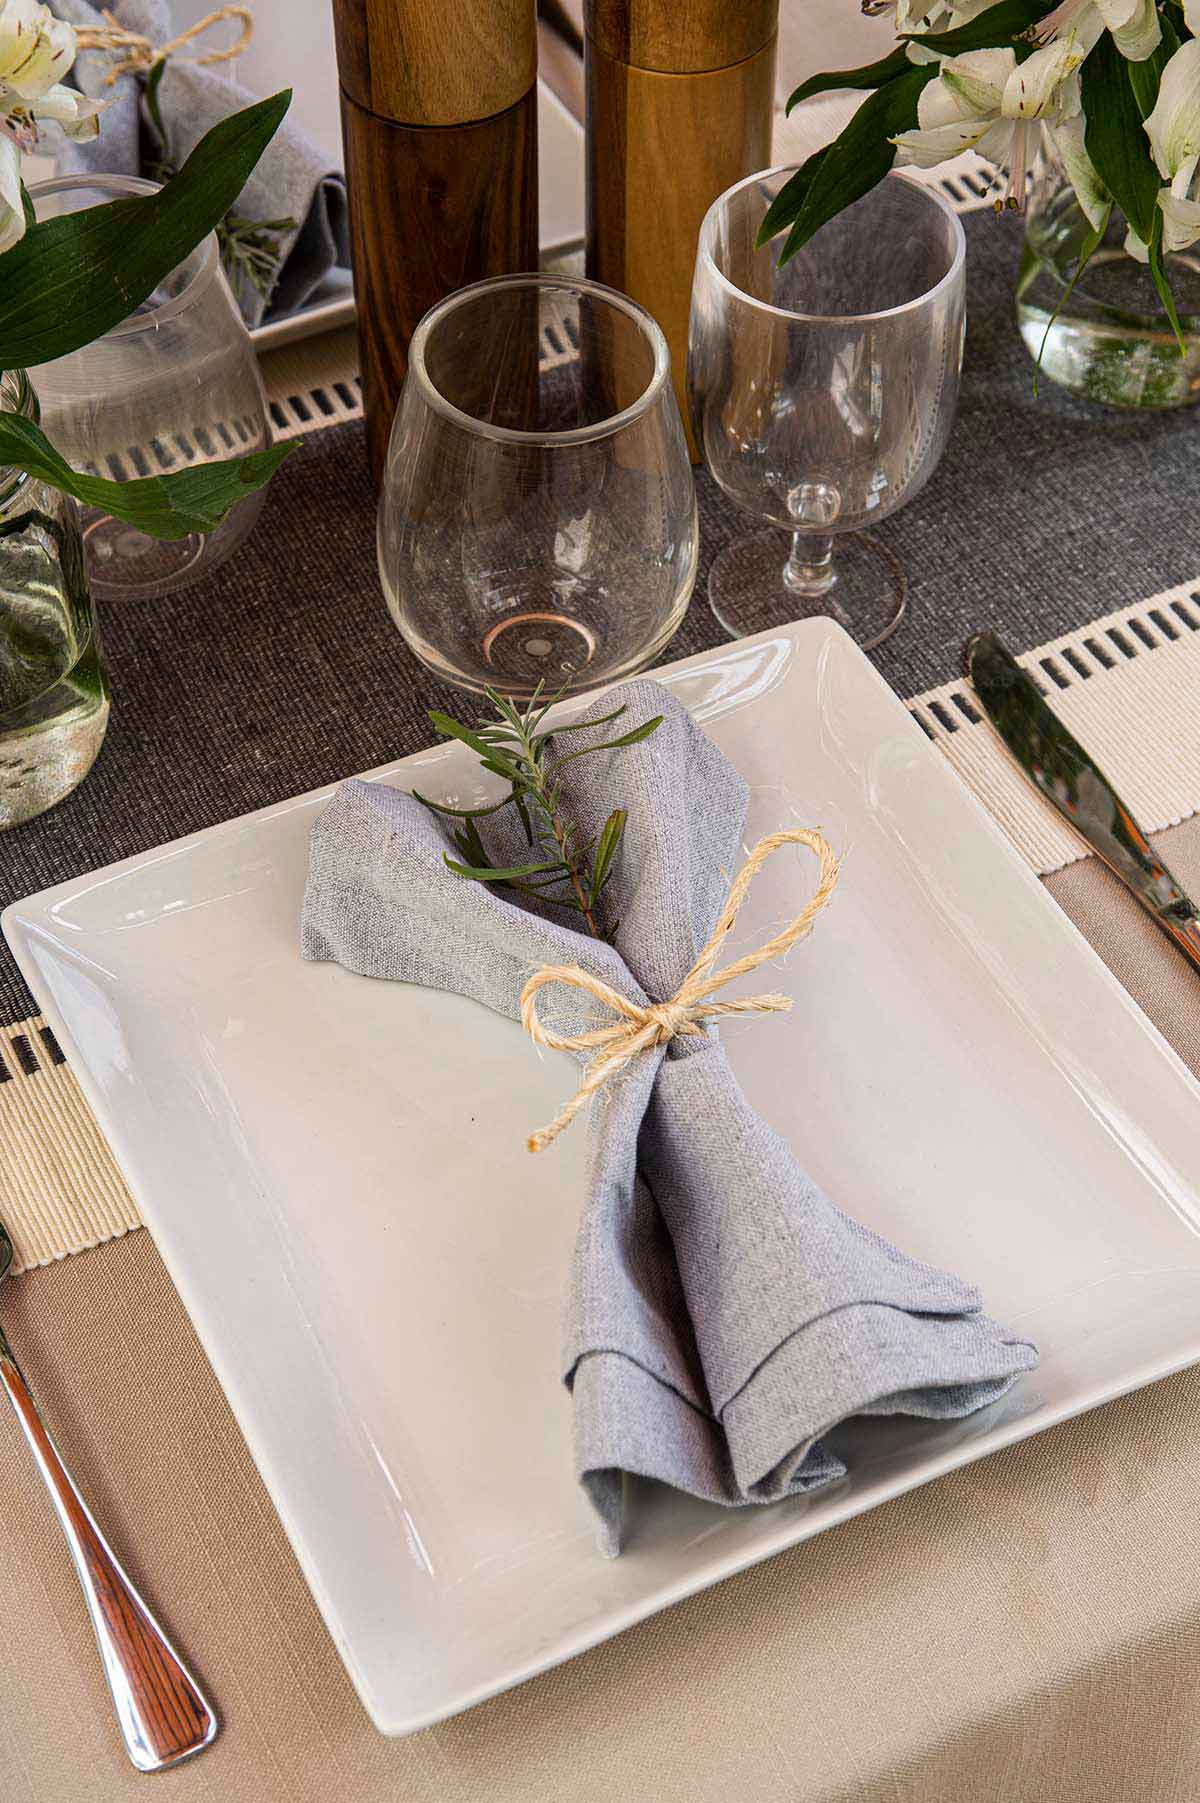 A napkin with a sprig of lavender greens tied to it on a plate on a table.